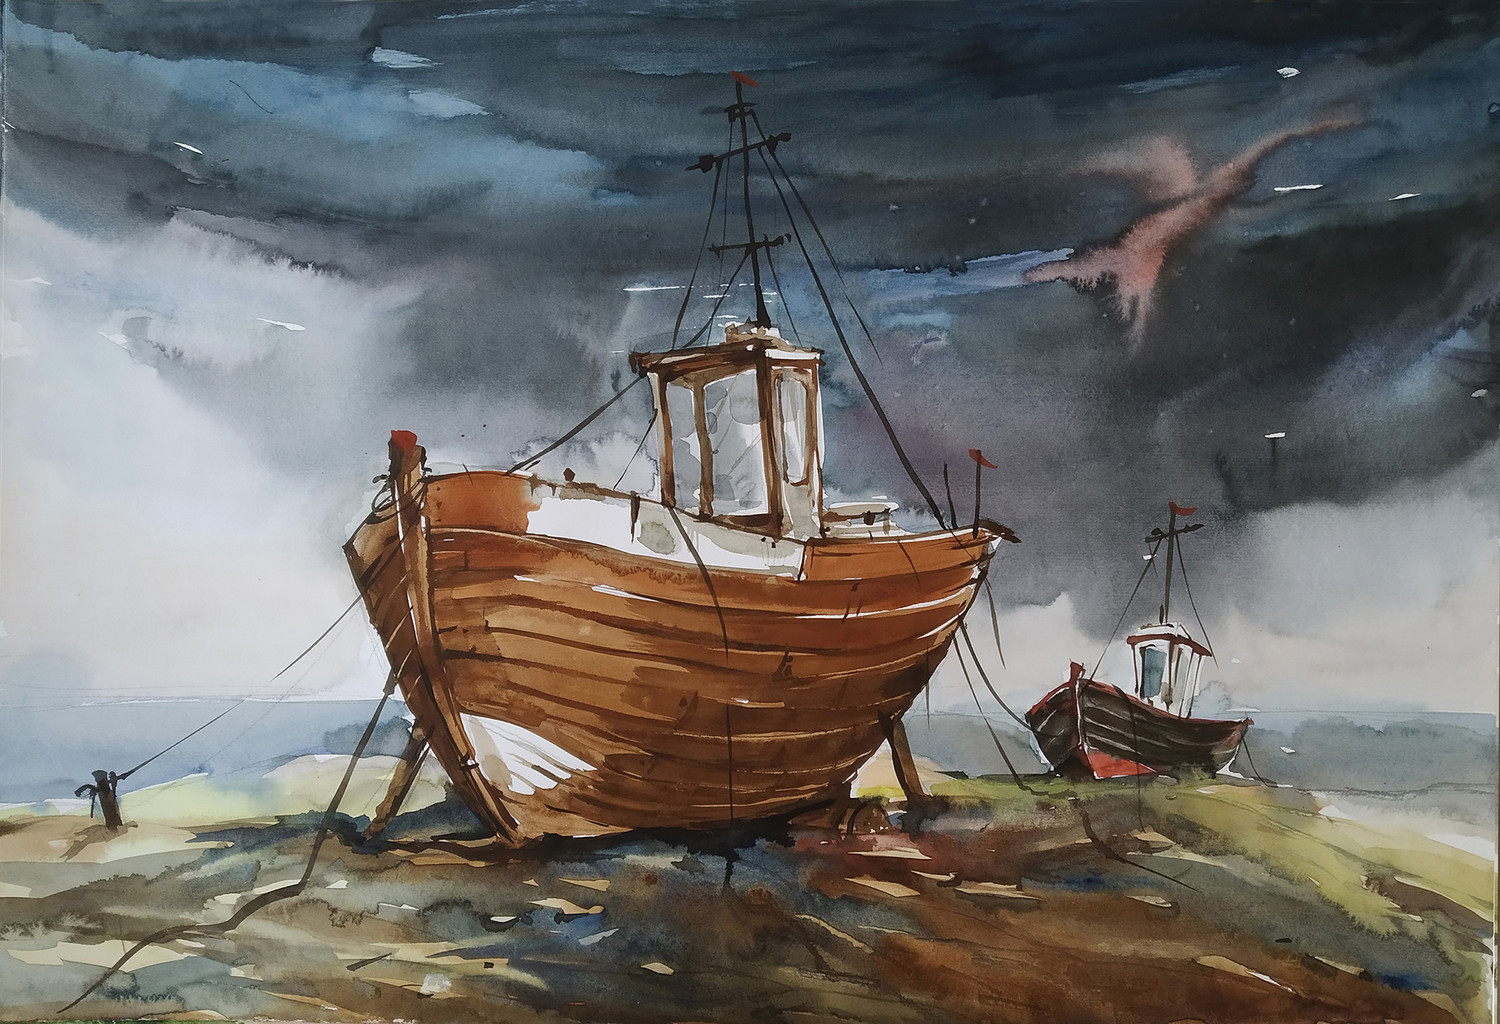 Fishing Boat in a Stormy Day (ART_7709_51318) - Handpainted Art Painting -  22in X 15in